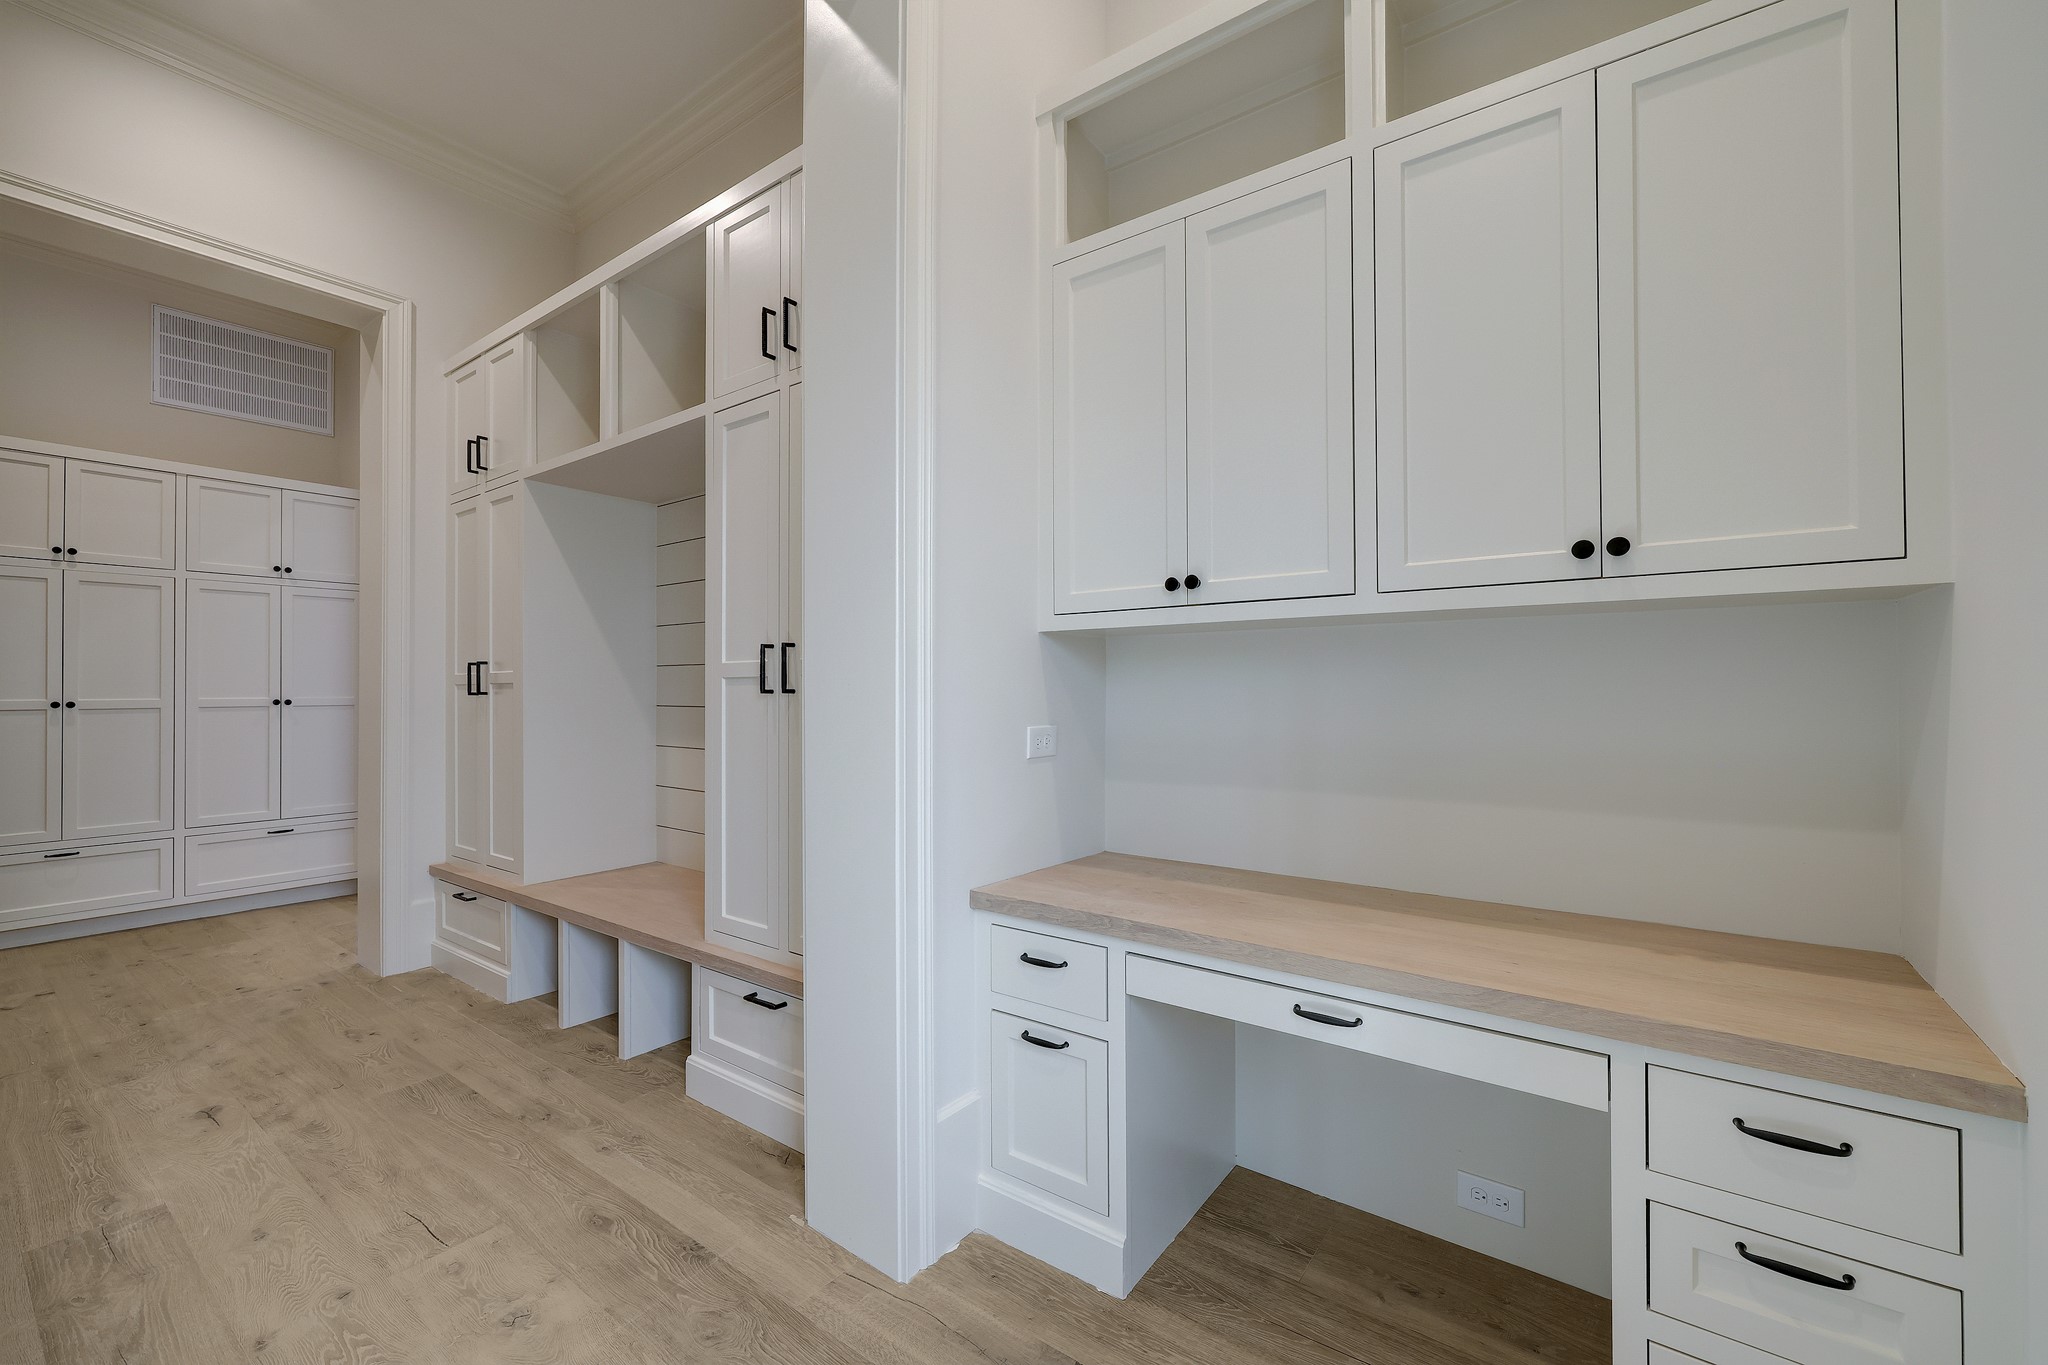 When you arrive from the two-car attached garage, you're welcomed to this fabulous drop-off/ mud room space with built in desk, lockers, and storage.